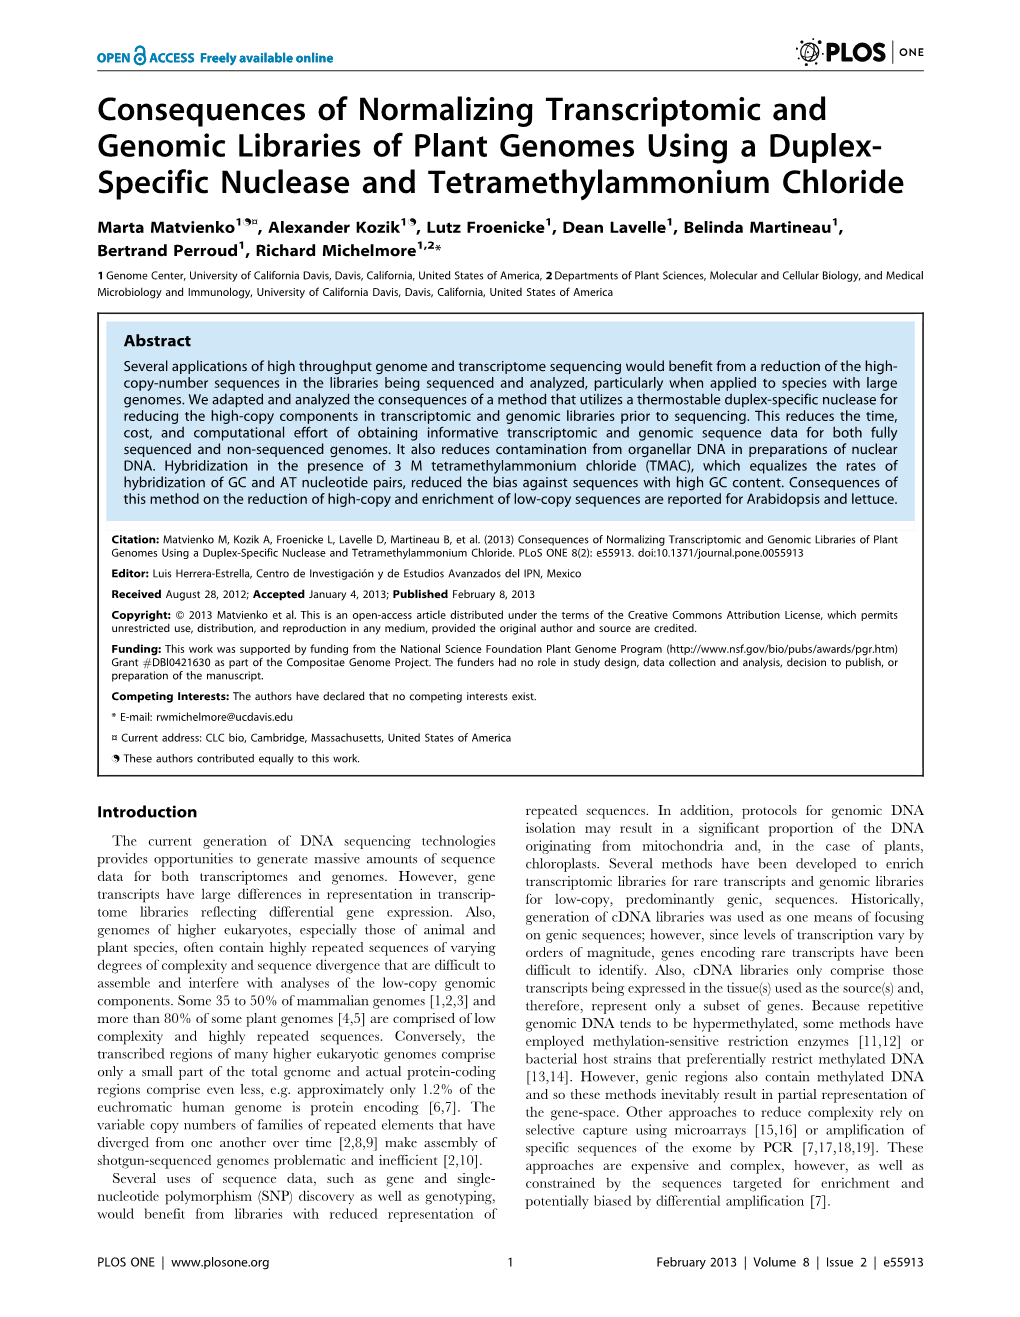 Consequences of Normalizing Transcriptomic and Genomic Libraries of Plant Genomes Using a Duplex- Specific Nuclease and Tetramethylammonium Chloride